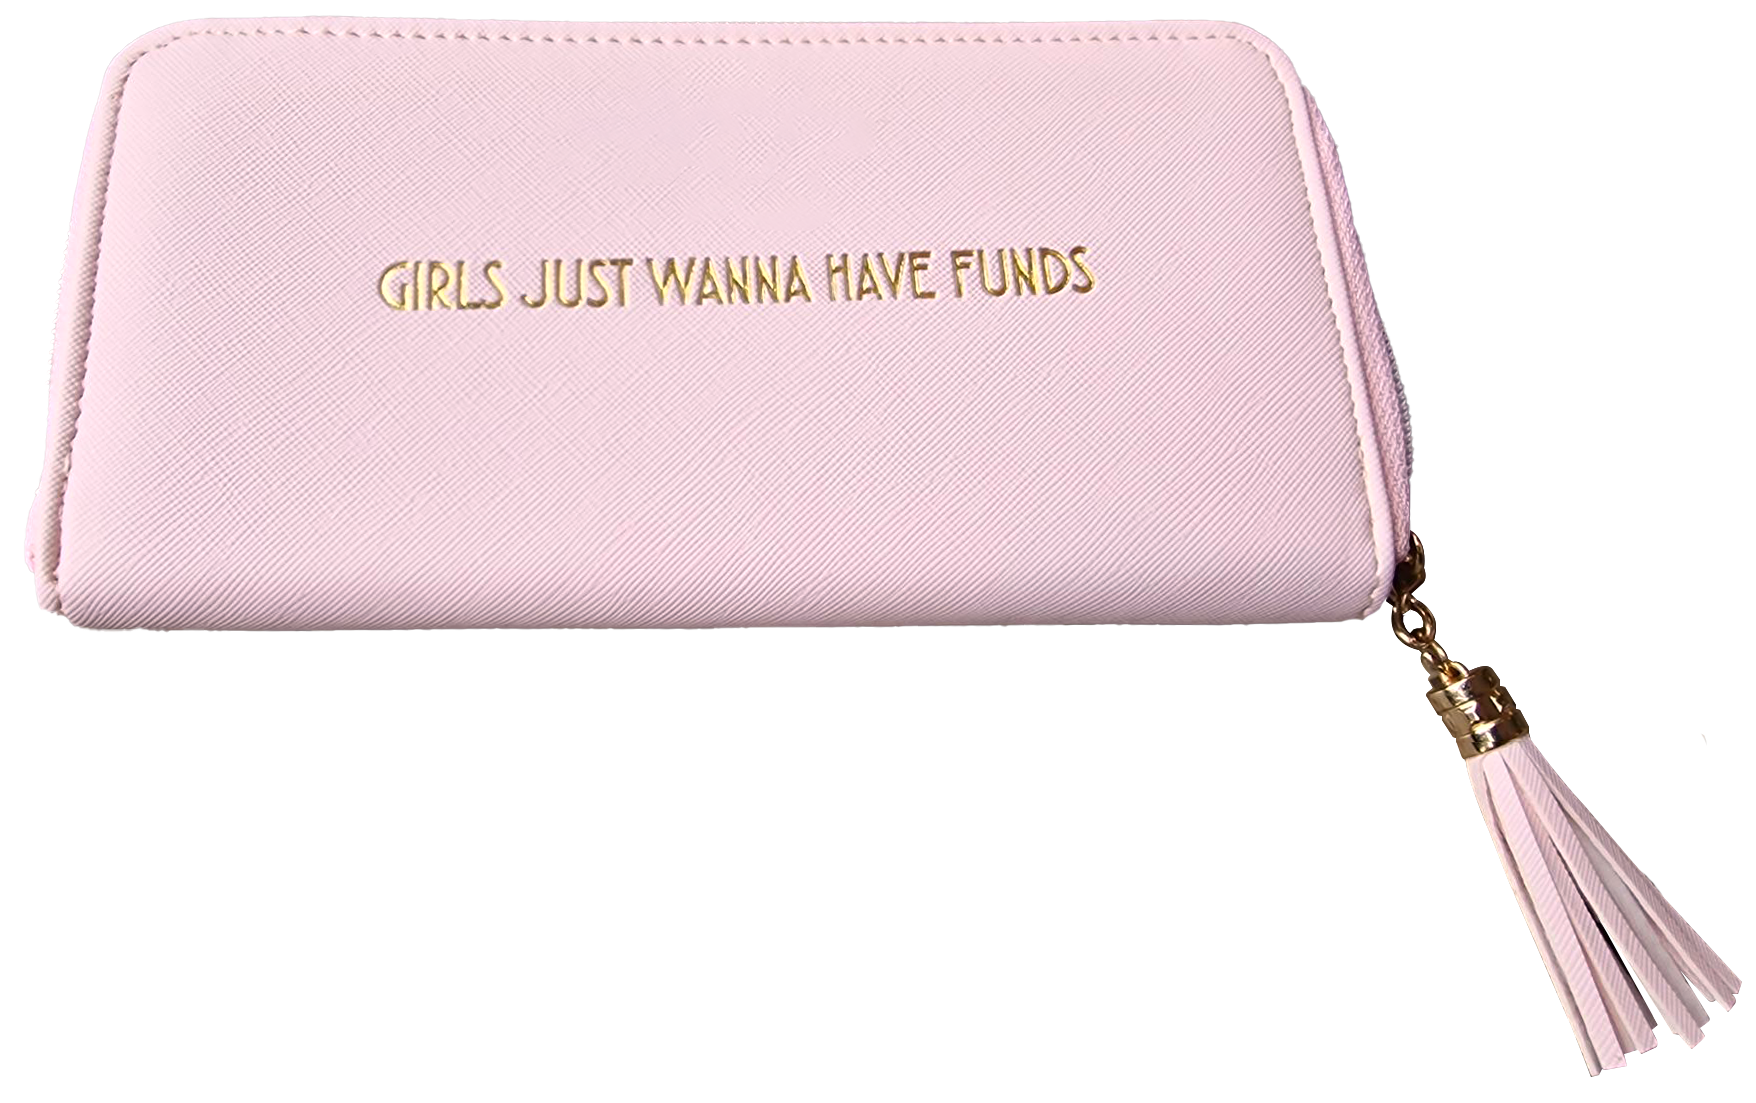 Girls just want to have funds purse